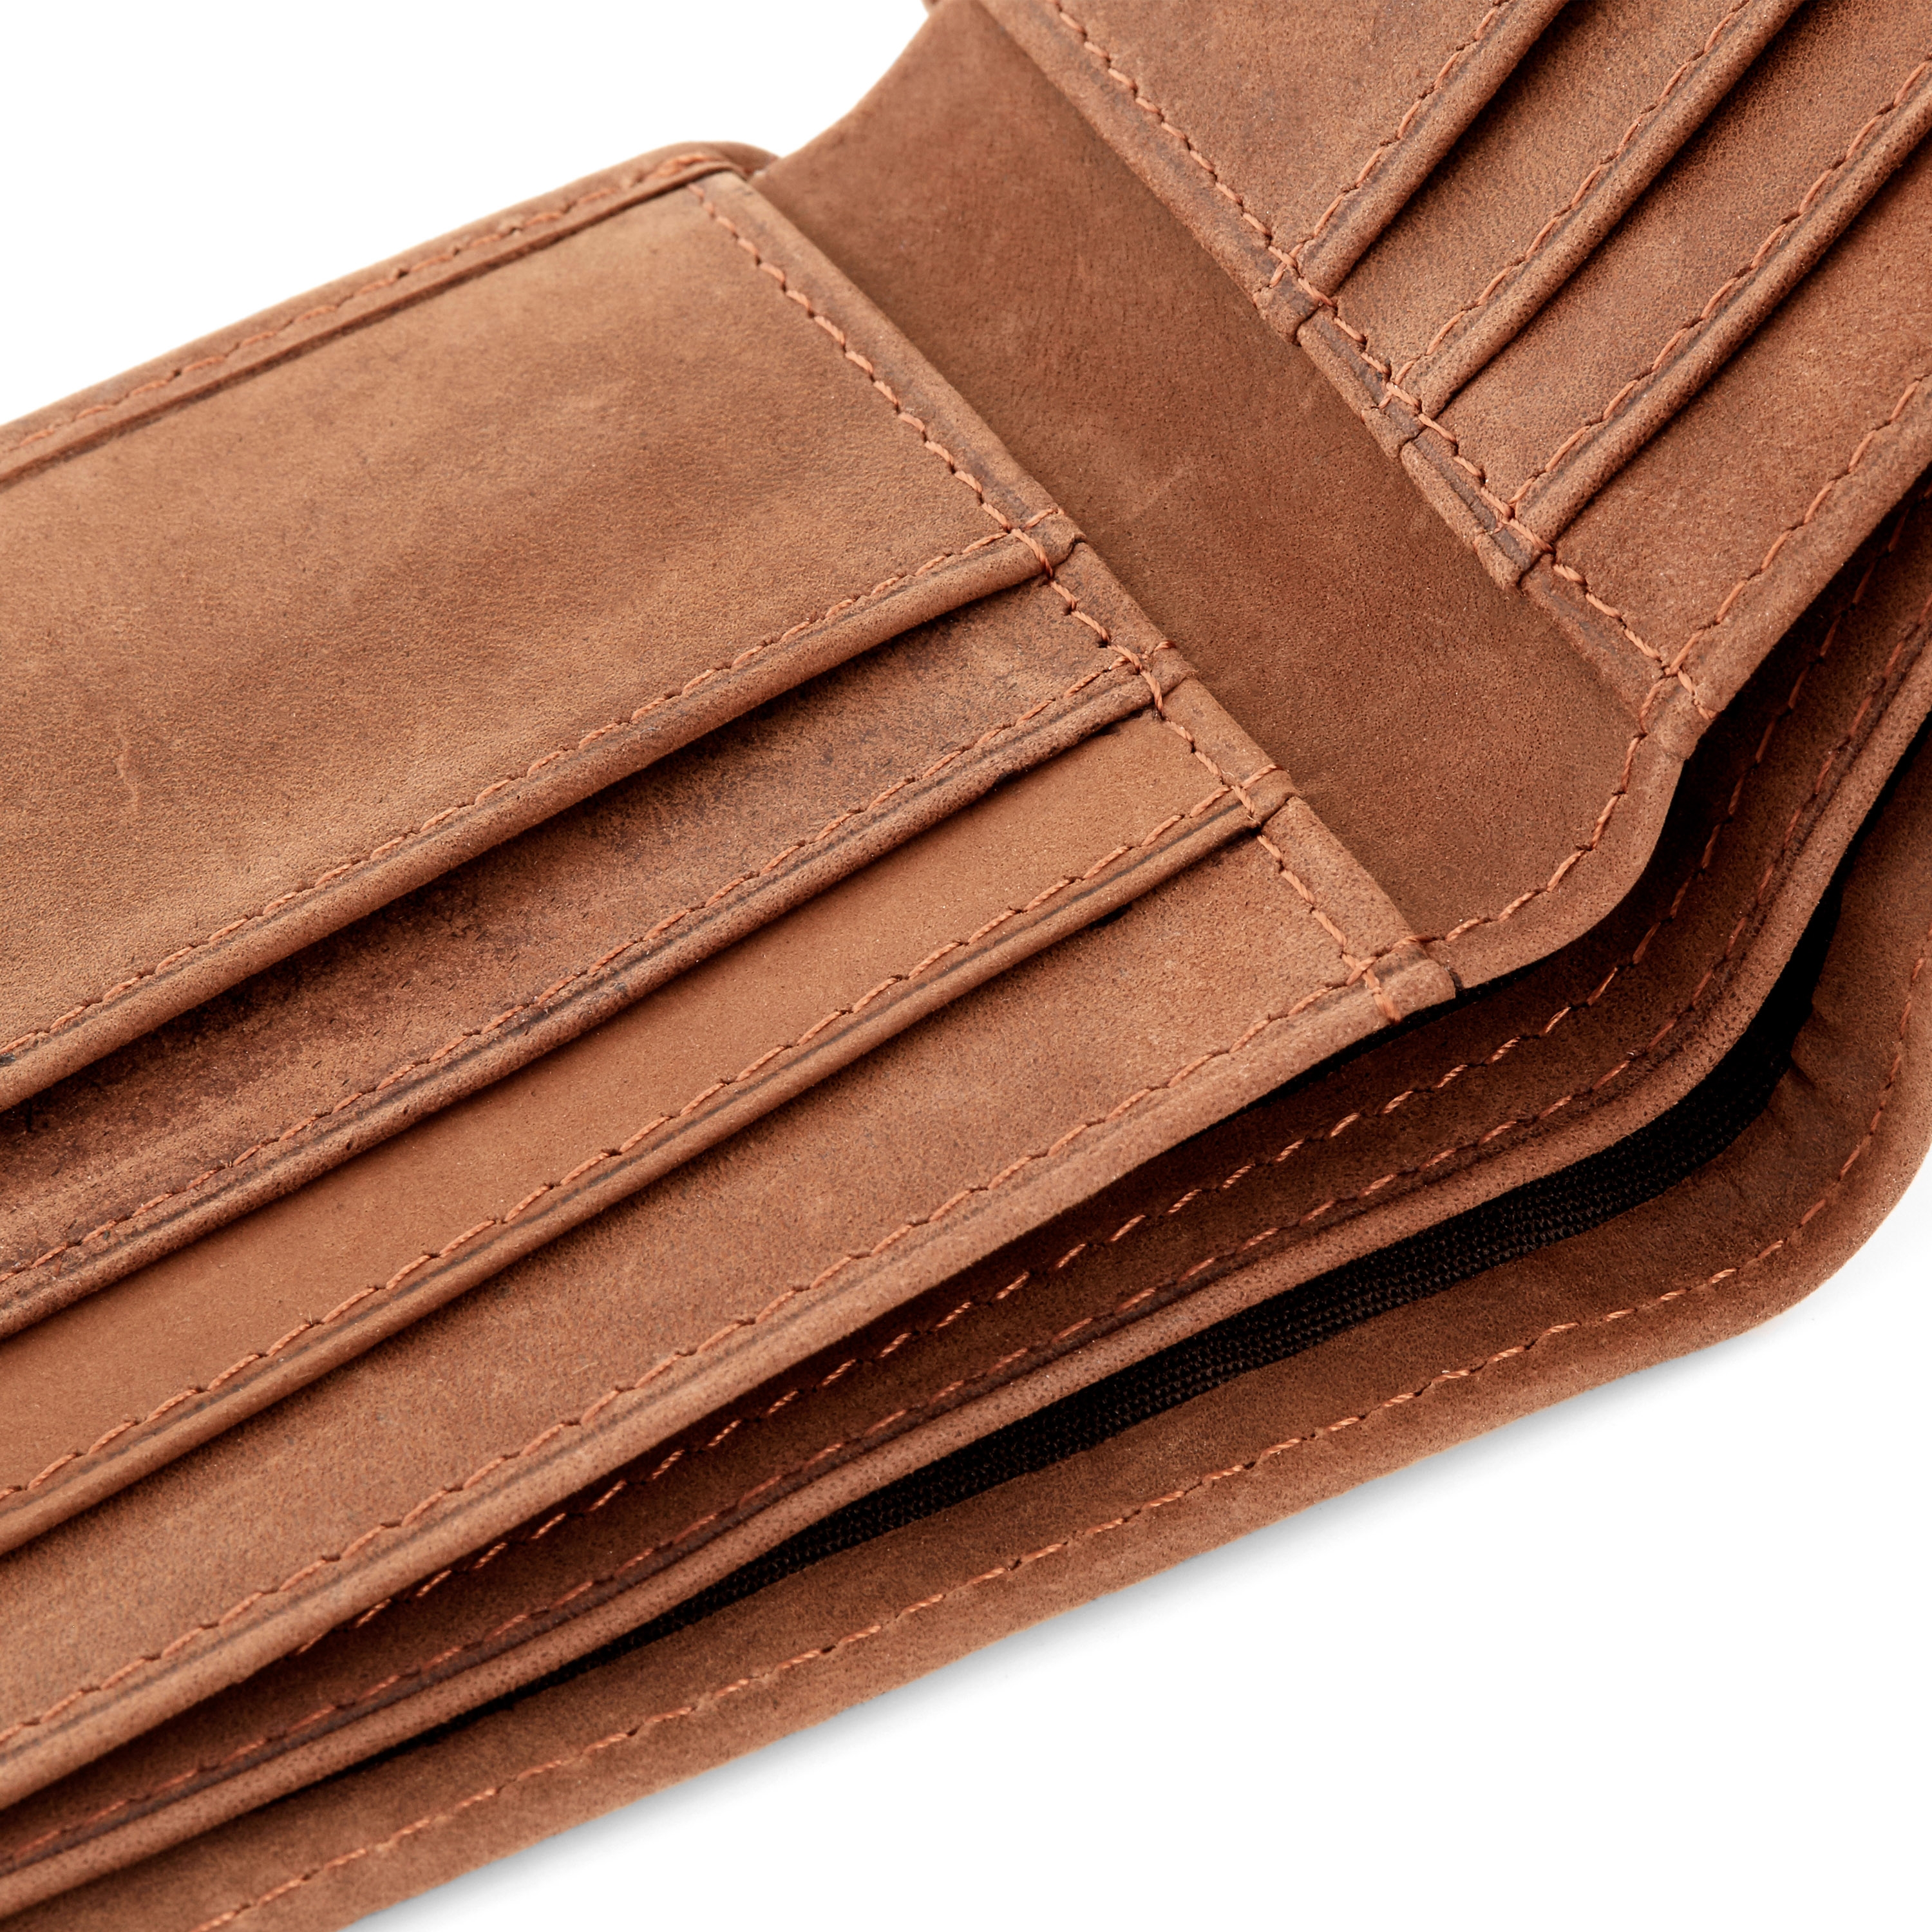 Collin Rowe Men's Basic Leather Wallet